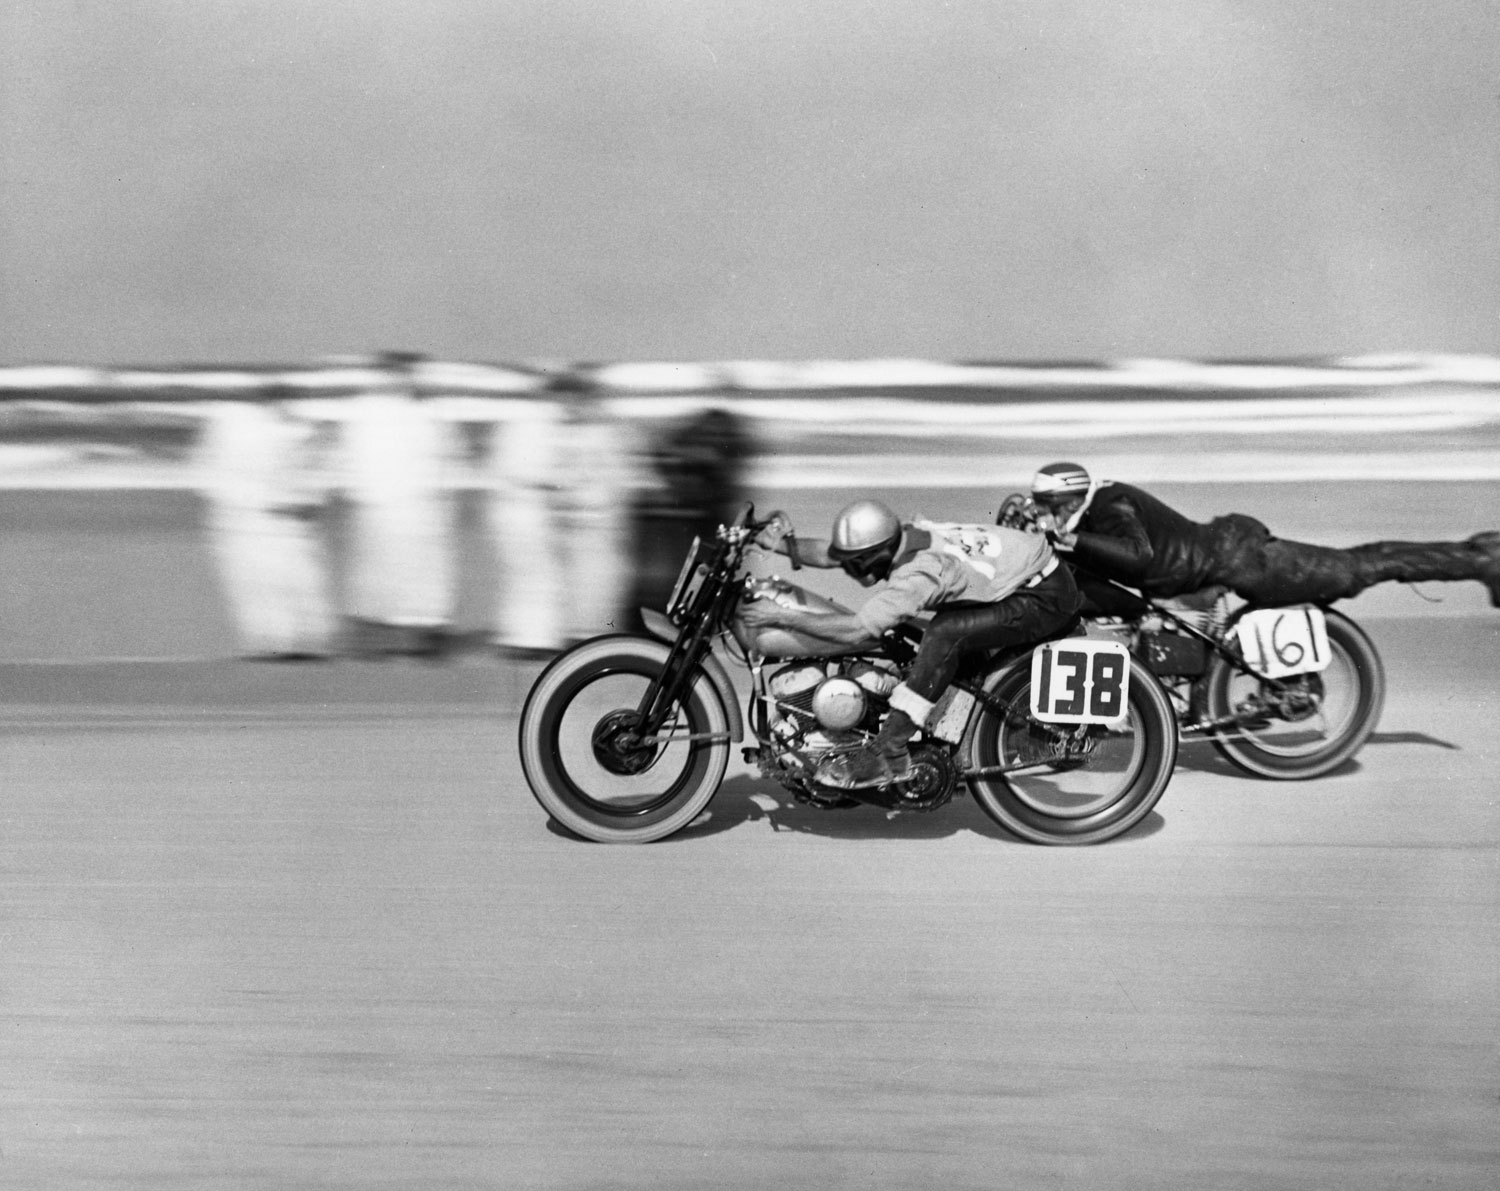 Number 161 Norman Teleford streamlines himself during a motorcycle race at Daytona Beach, March 1948.